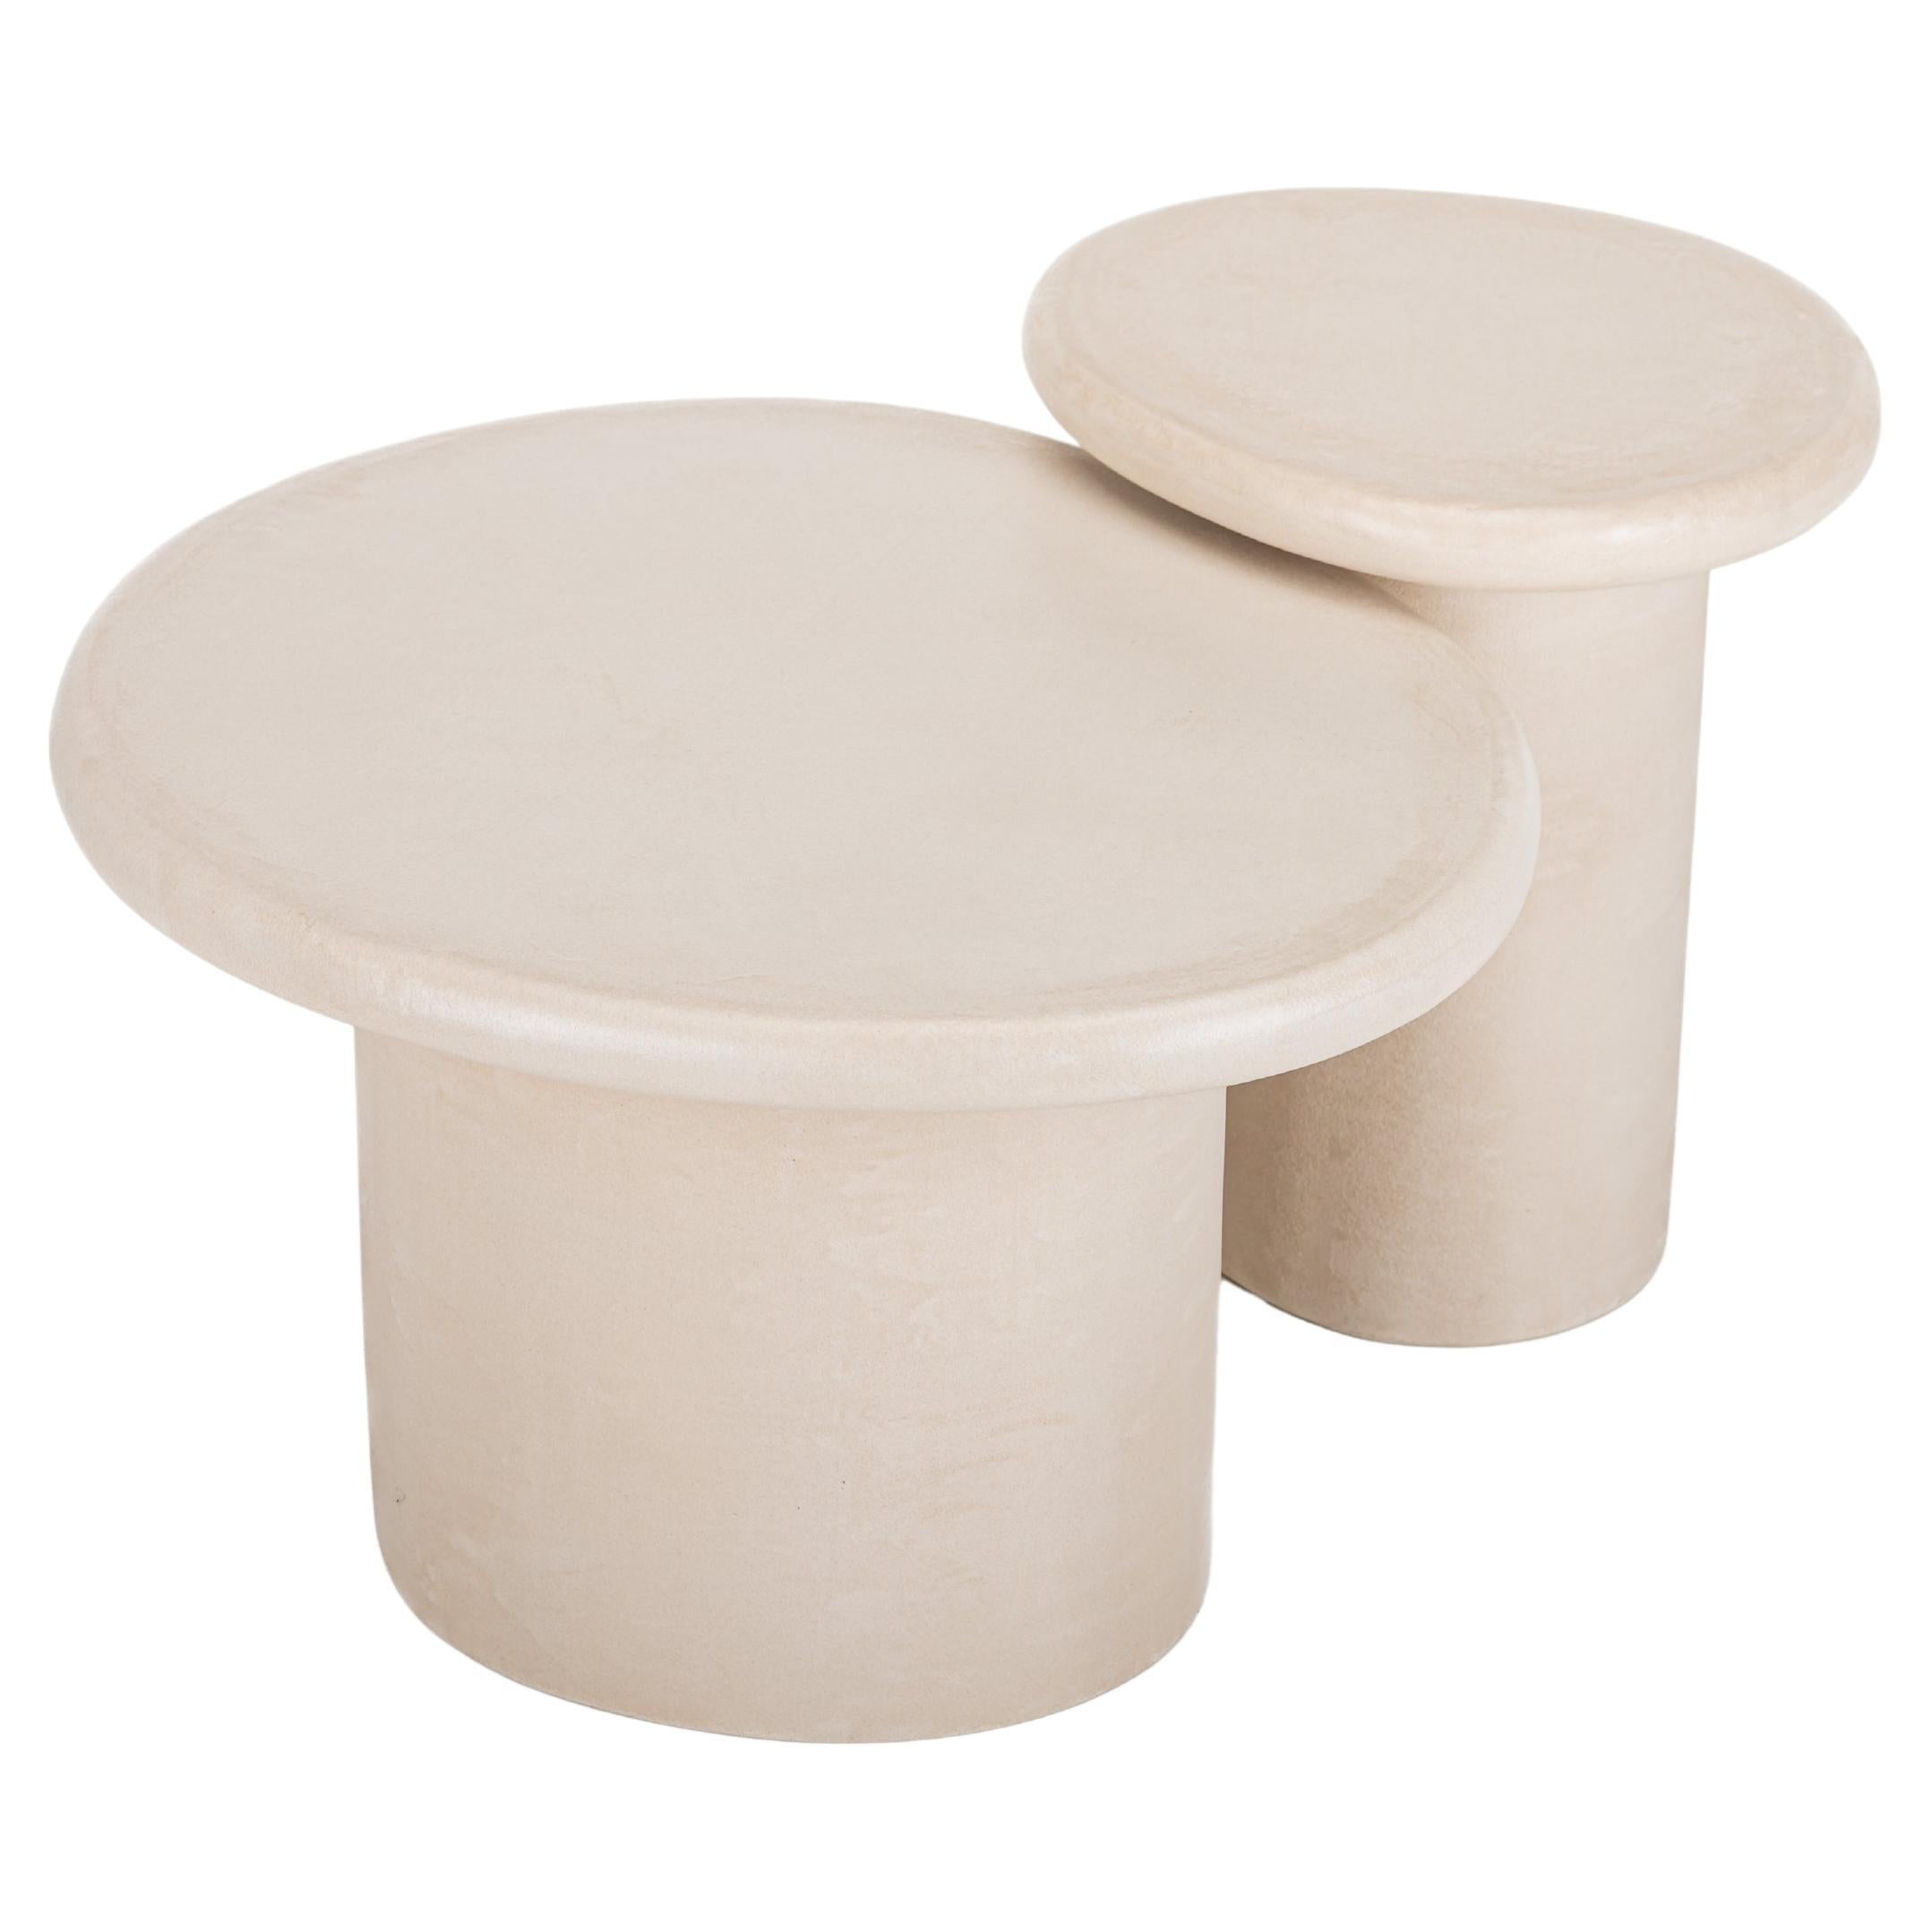 Organic Shaped Natural Plaster Coffee Table Set "Sami" by Isabelle Beaumont